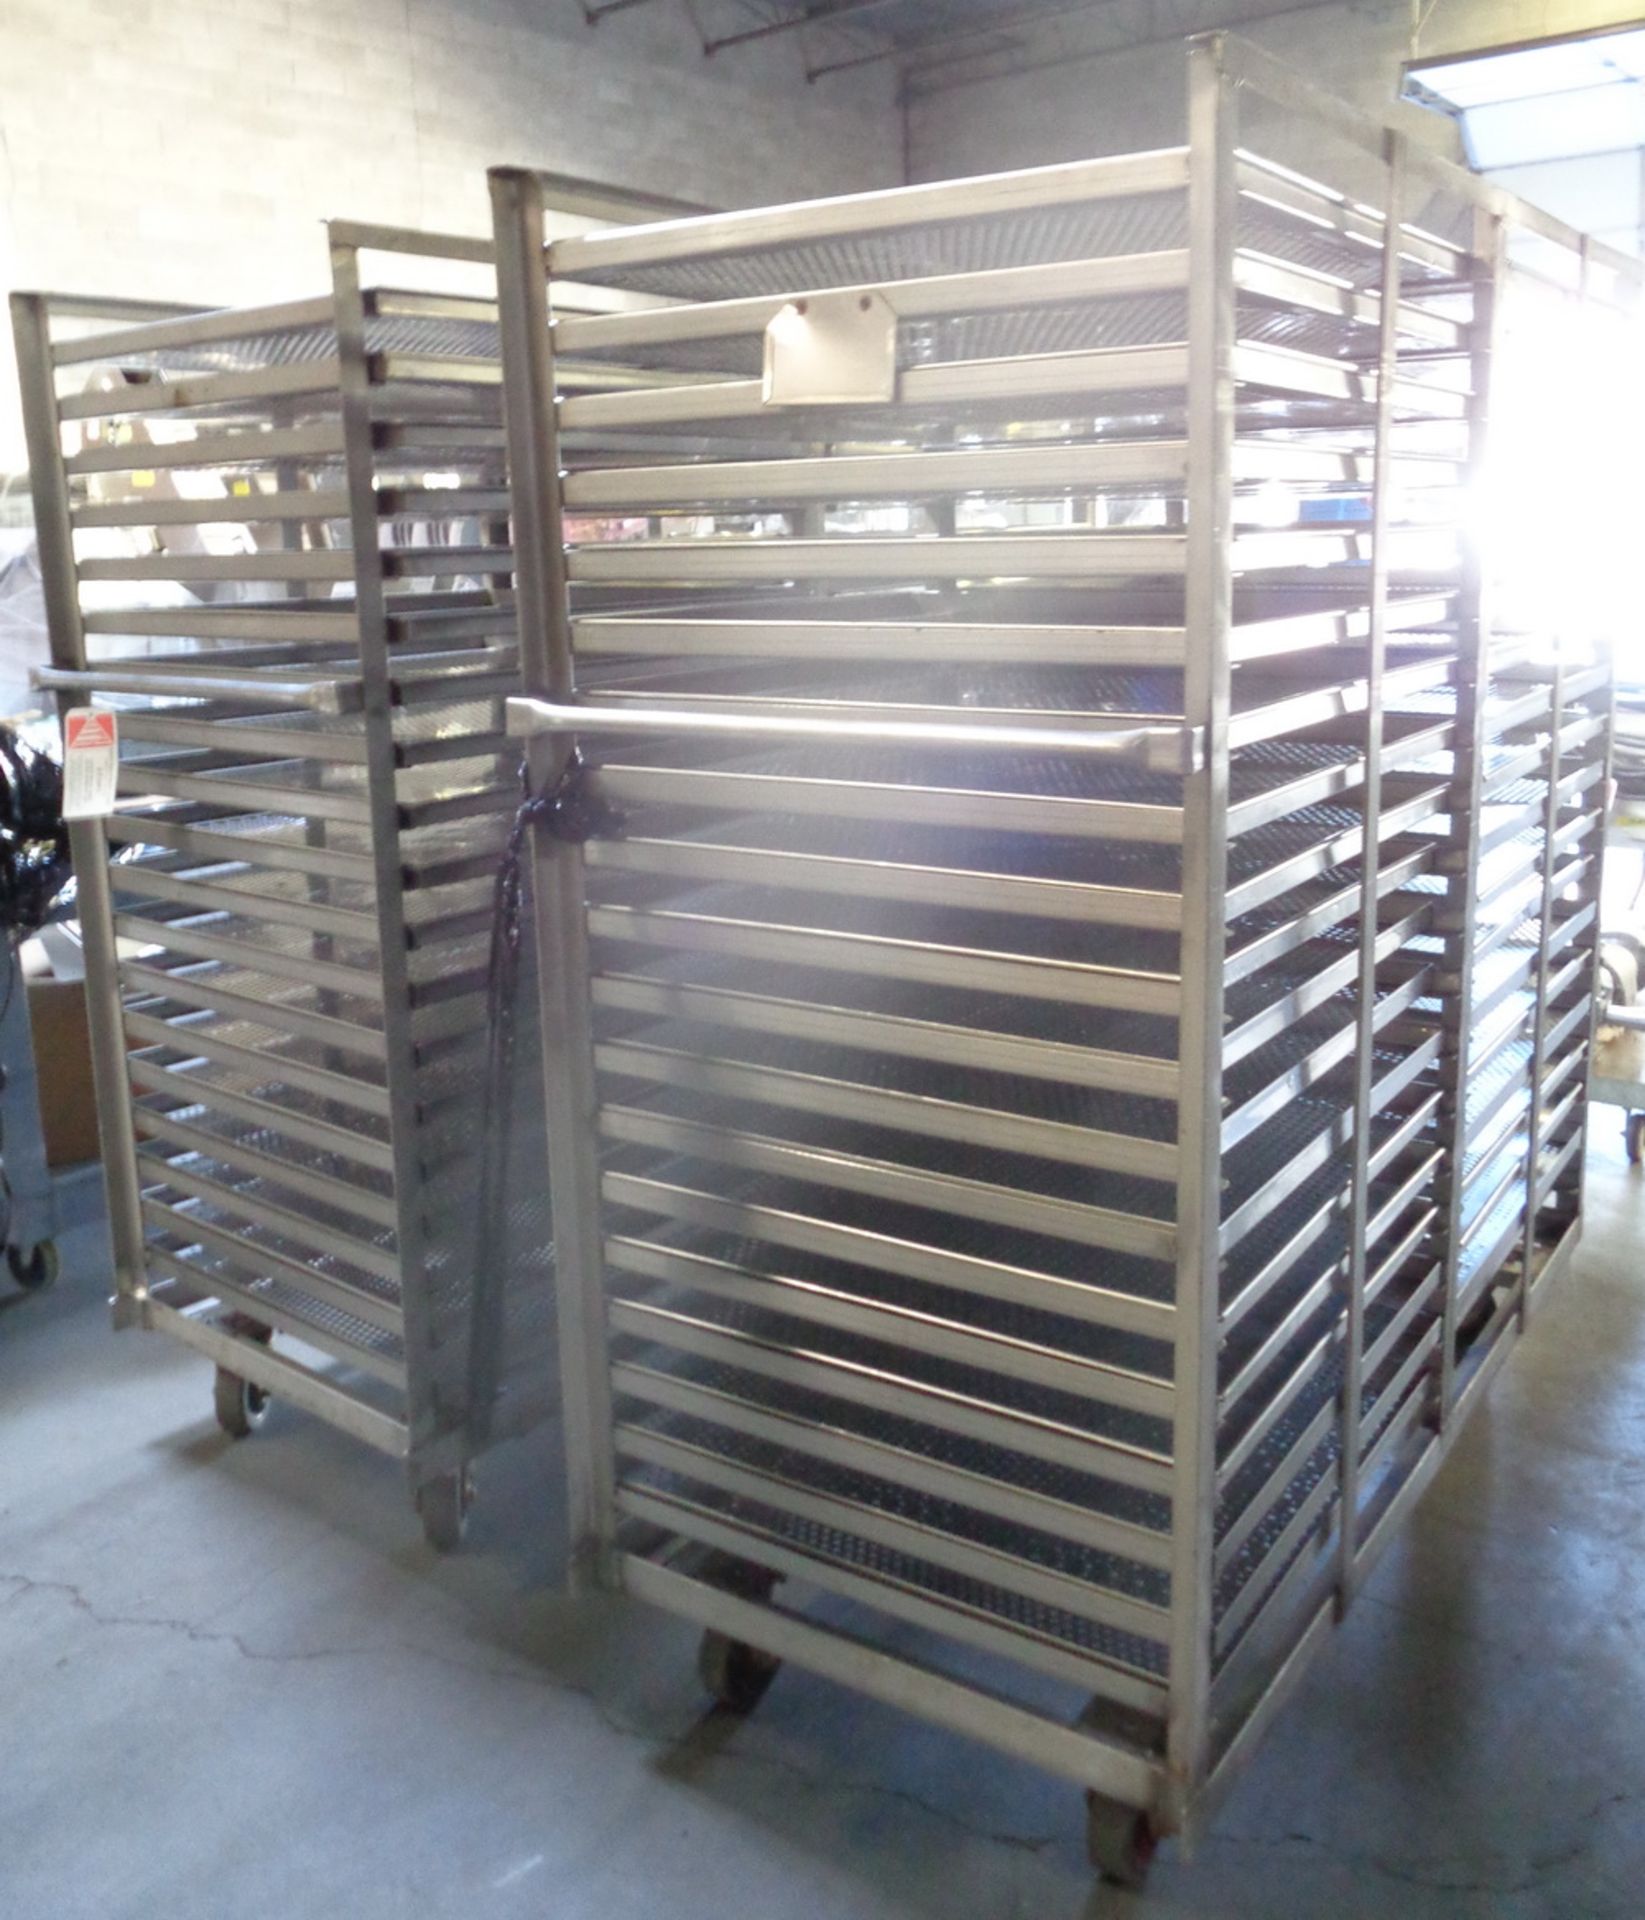 Stainless Steel Oven Rack, portable (for drying oven), includes 19 SS trays